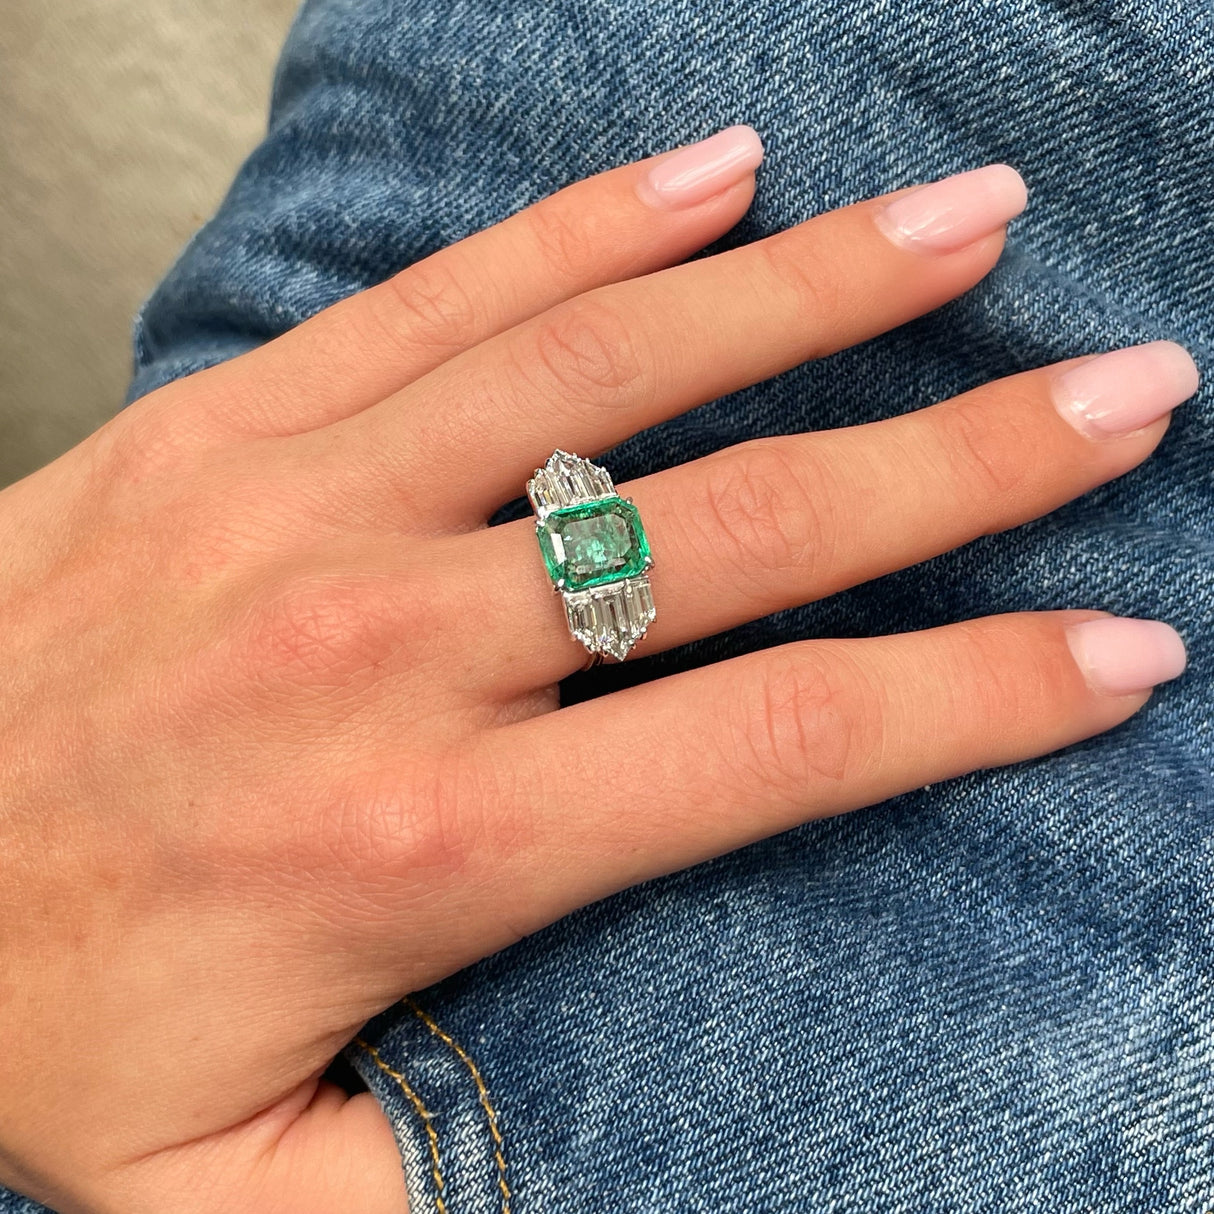 Vintage emerald and diamond engagement ring, worn on hand. 